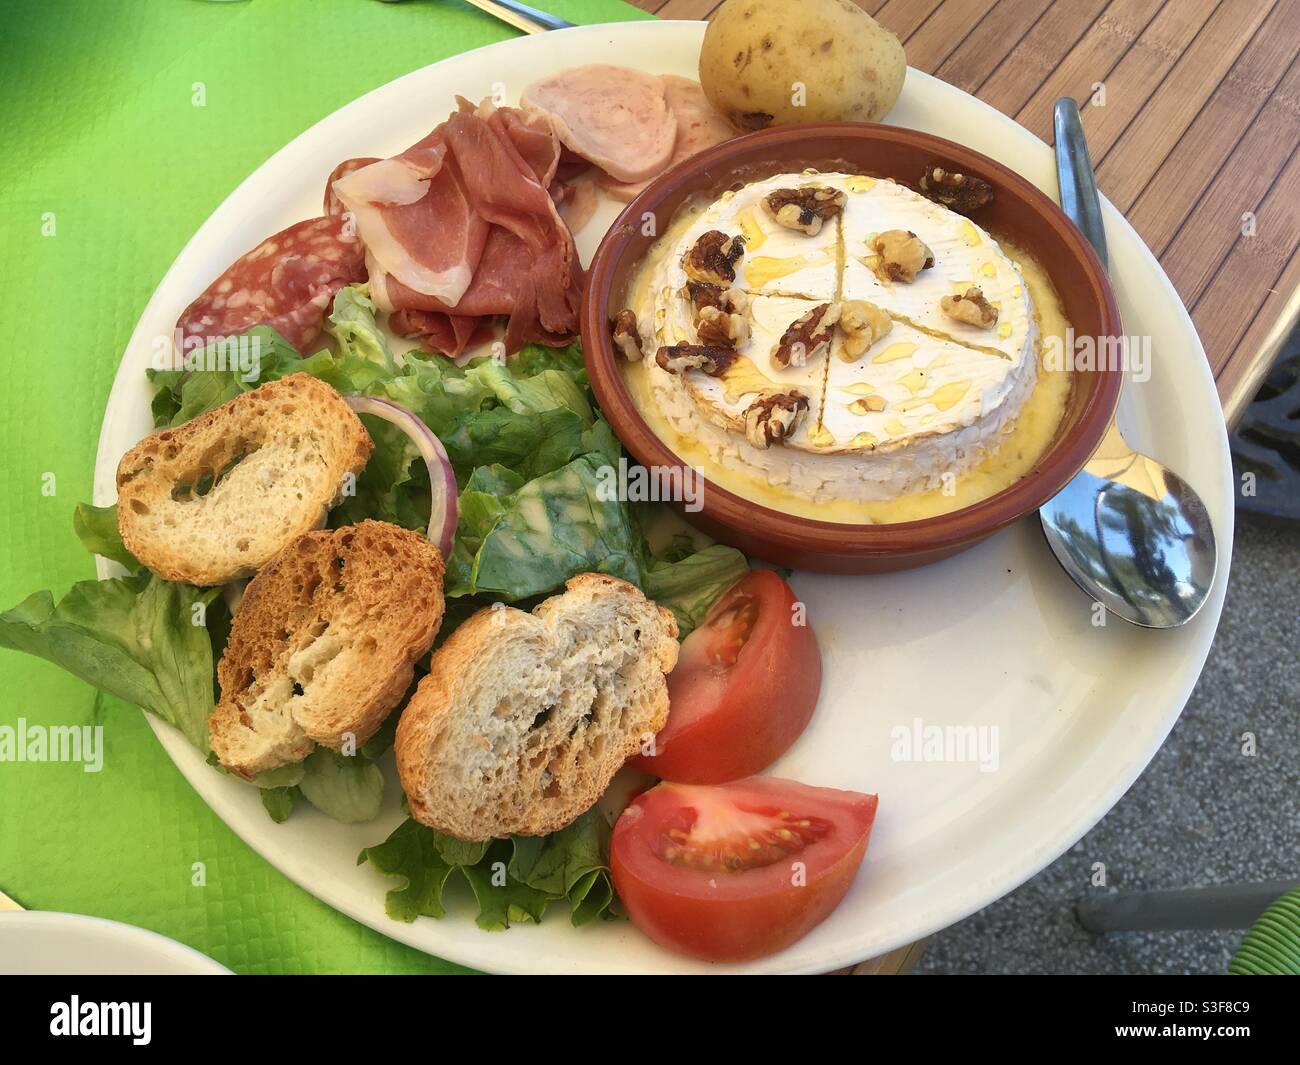 Salad with croutons, cold cuts and a fried Camembert cheese with nuts on a restaurant plate in small French village Valergues near Montpellier, Occitanie, south of France Stock Photo